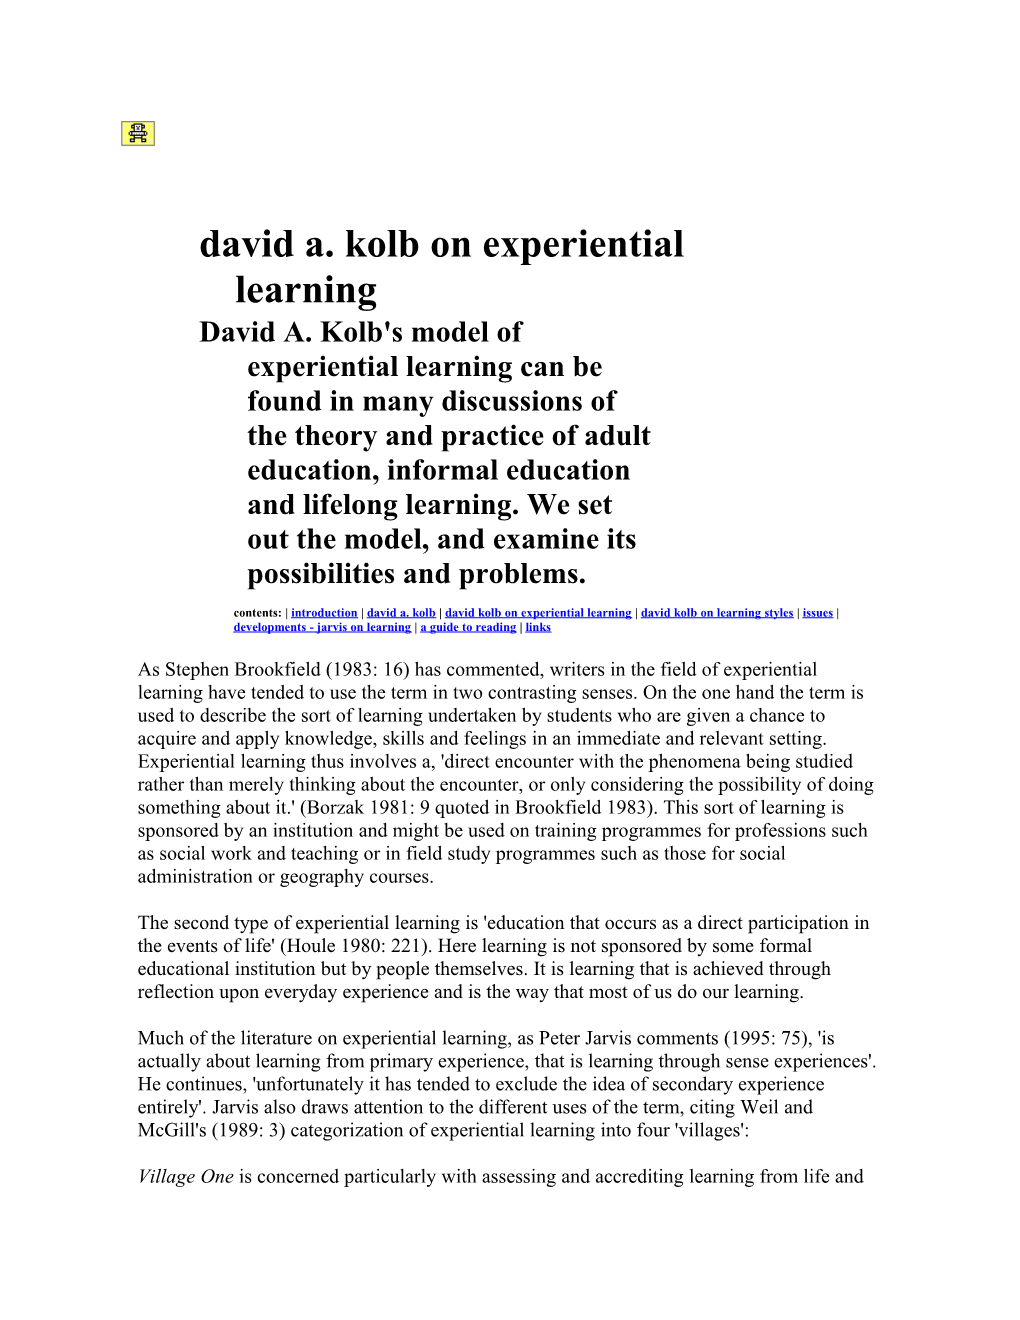 David A. Kolb on Experiential Learning